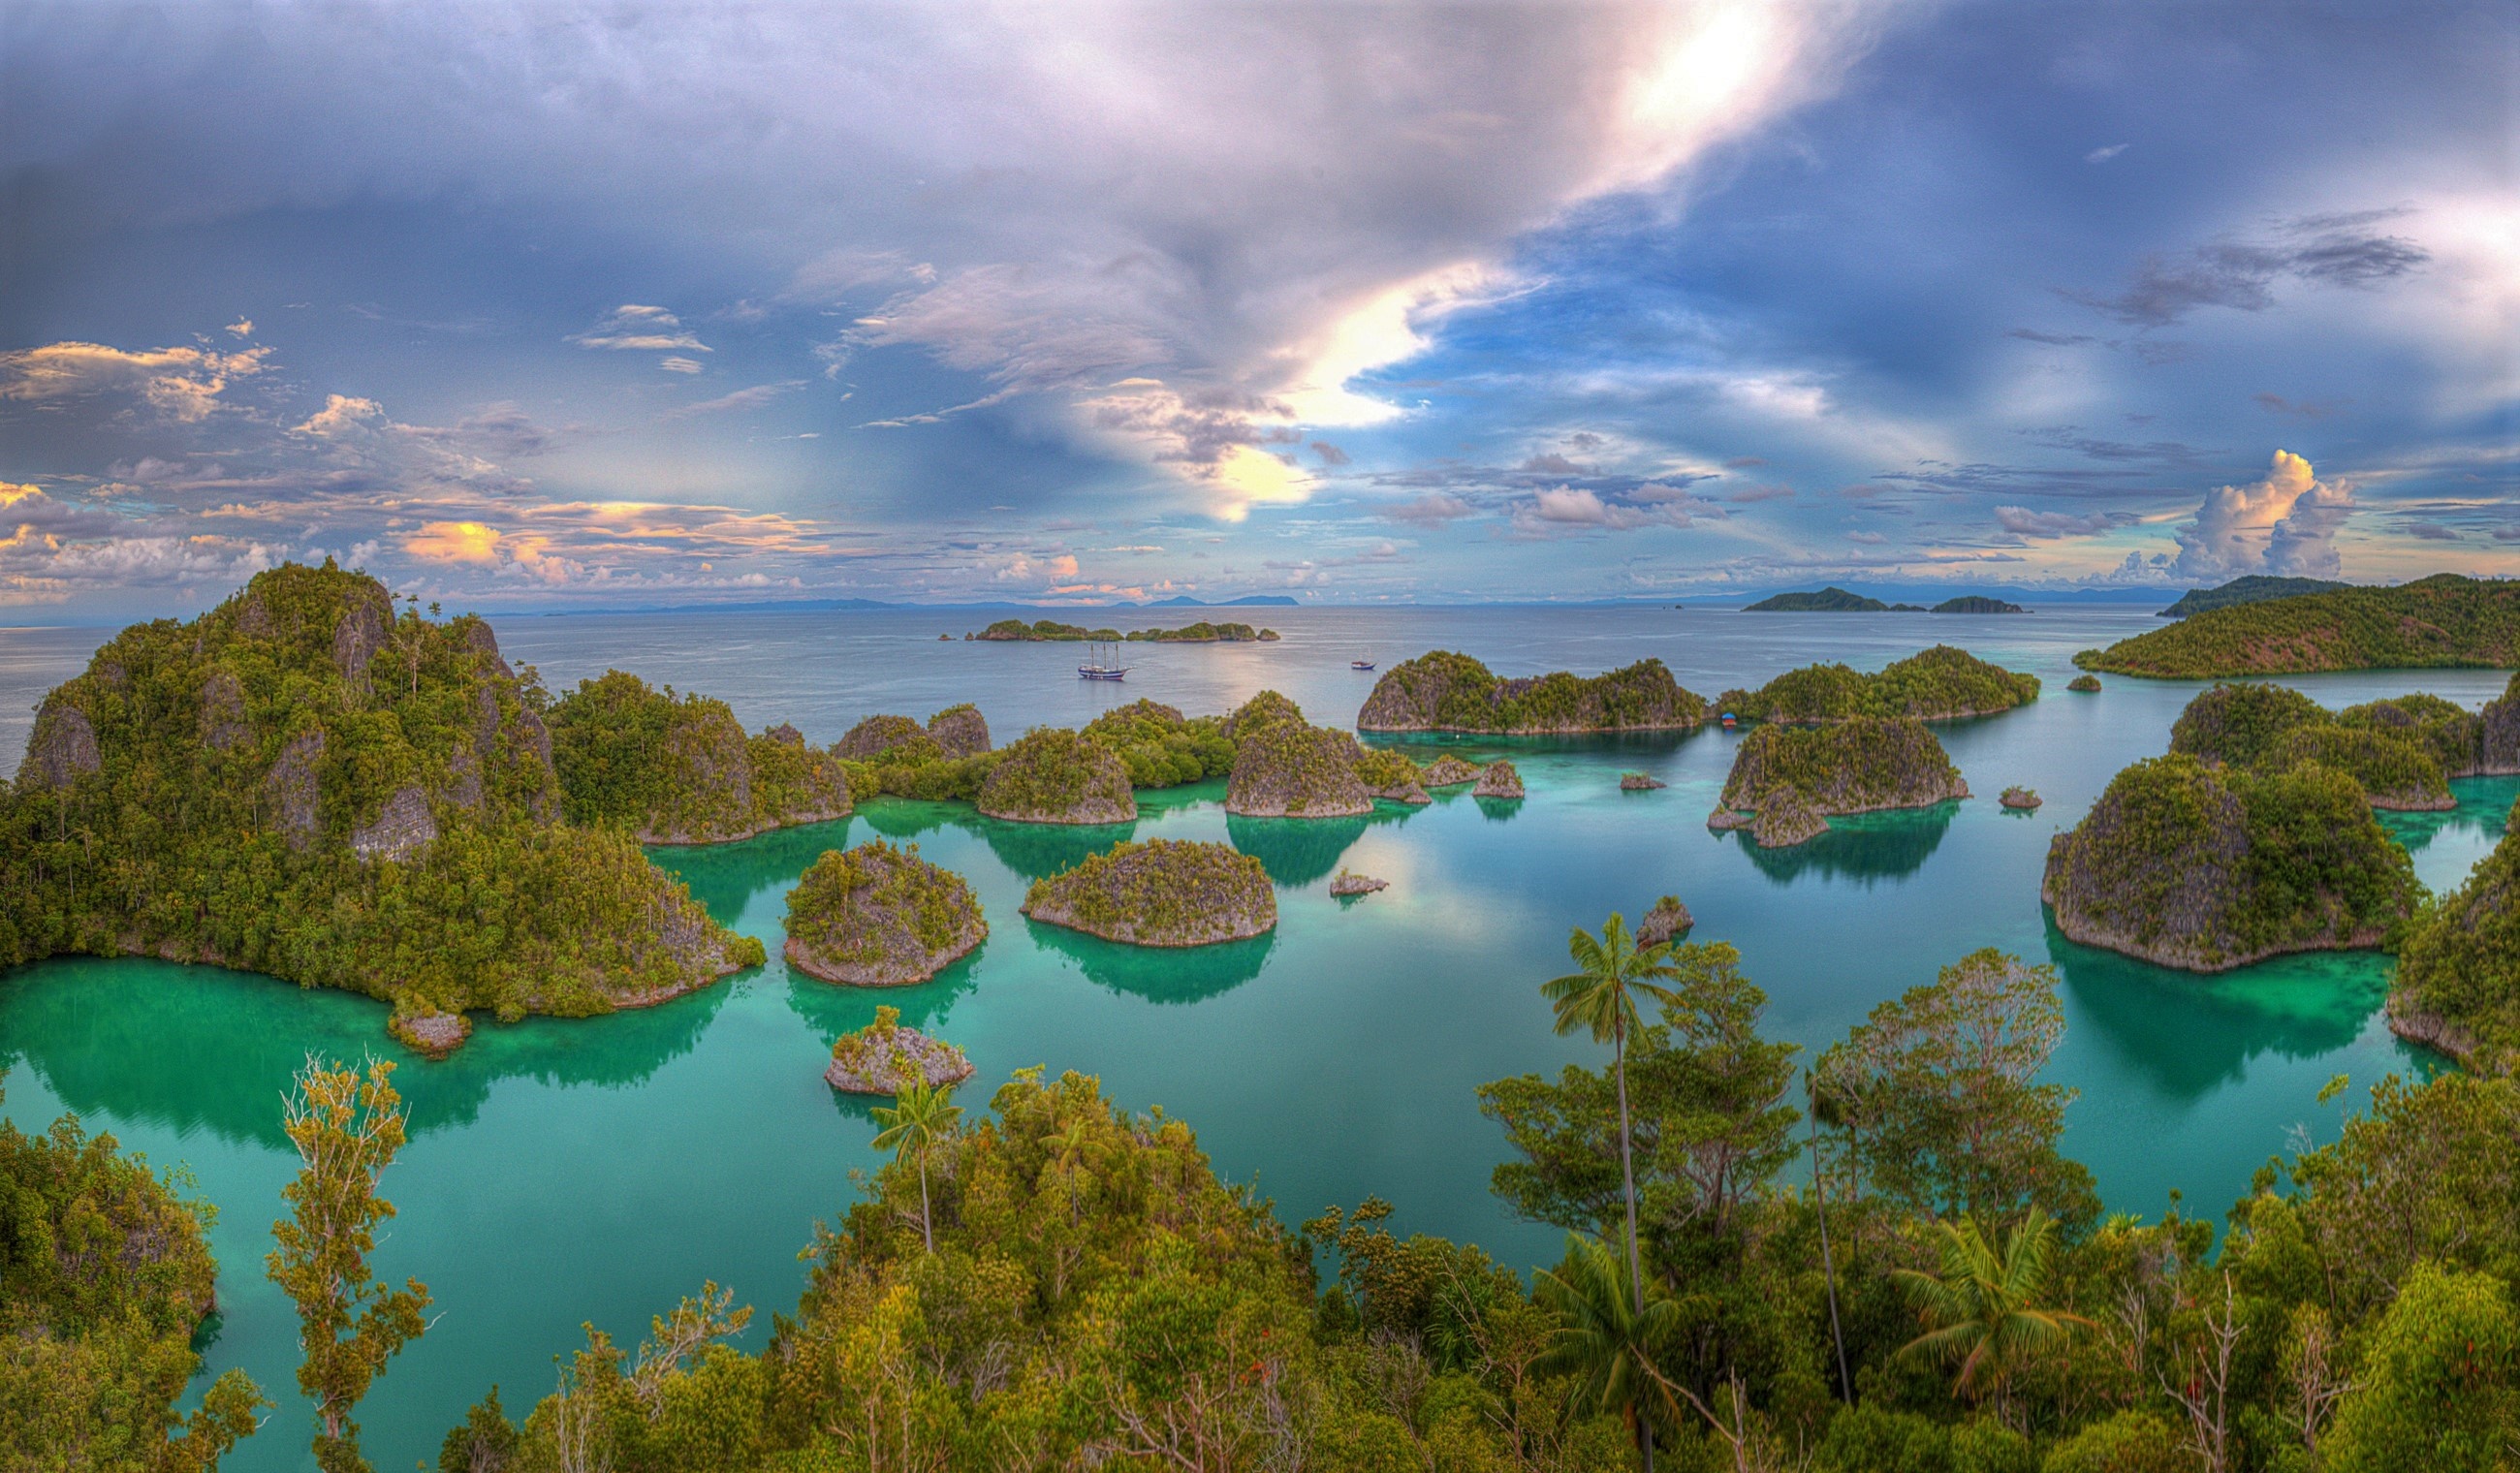 Beautiful Indonesia, Picturesque landscapes, Stunning wallpapers, Awe-inspiring sights, 2600x1520 HD Desktop